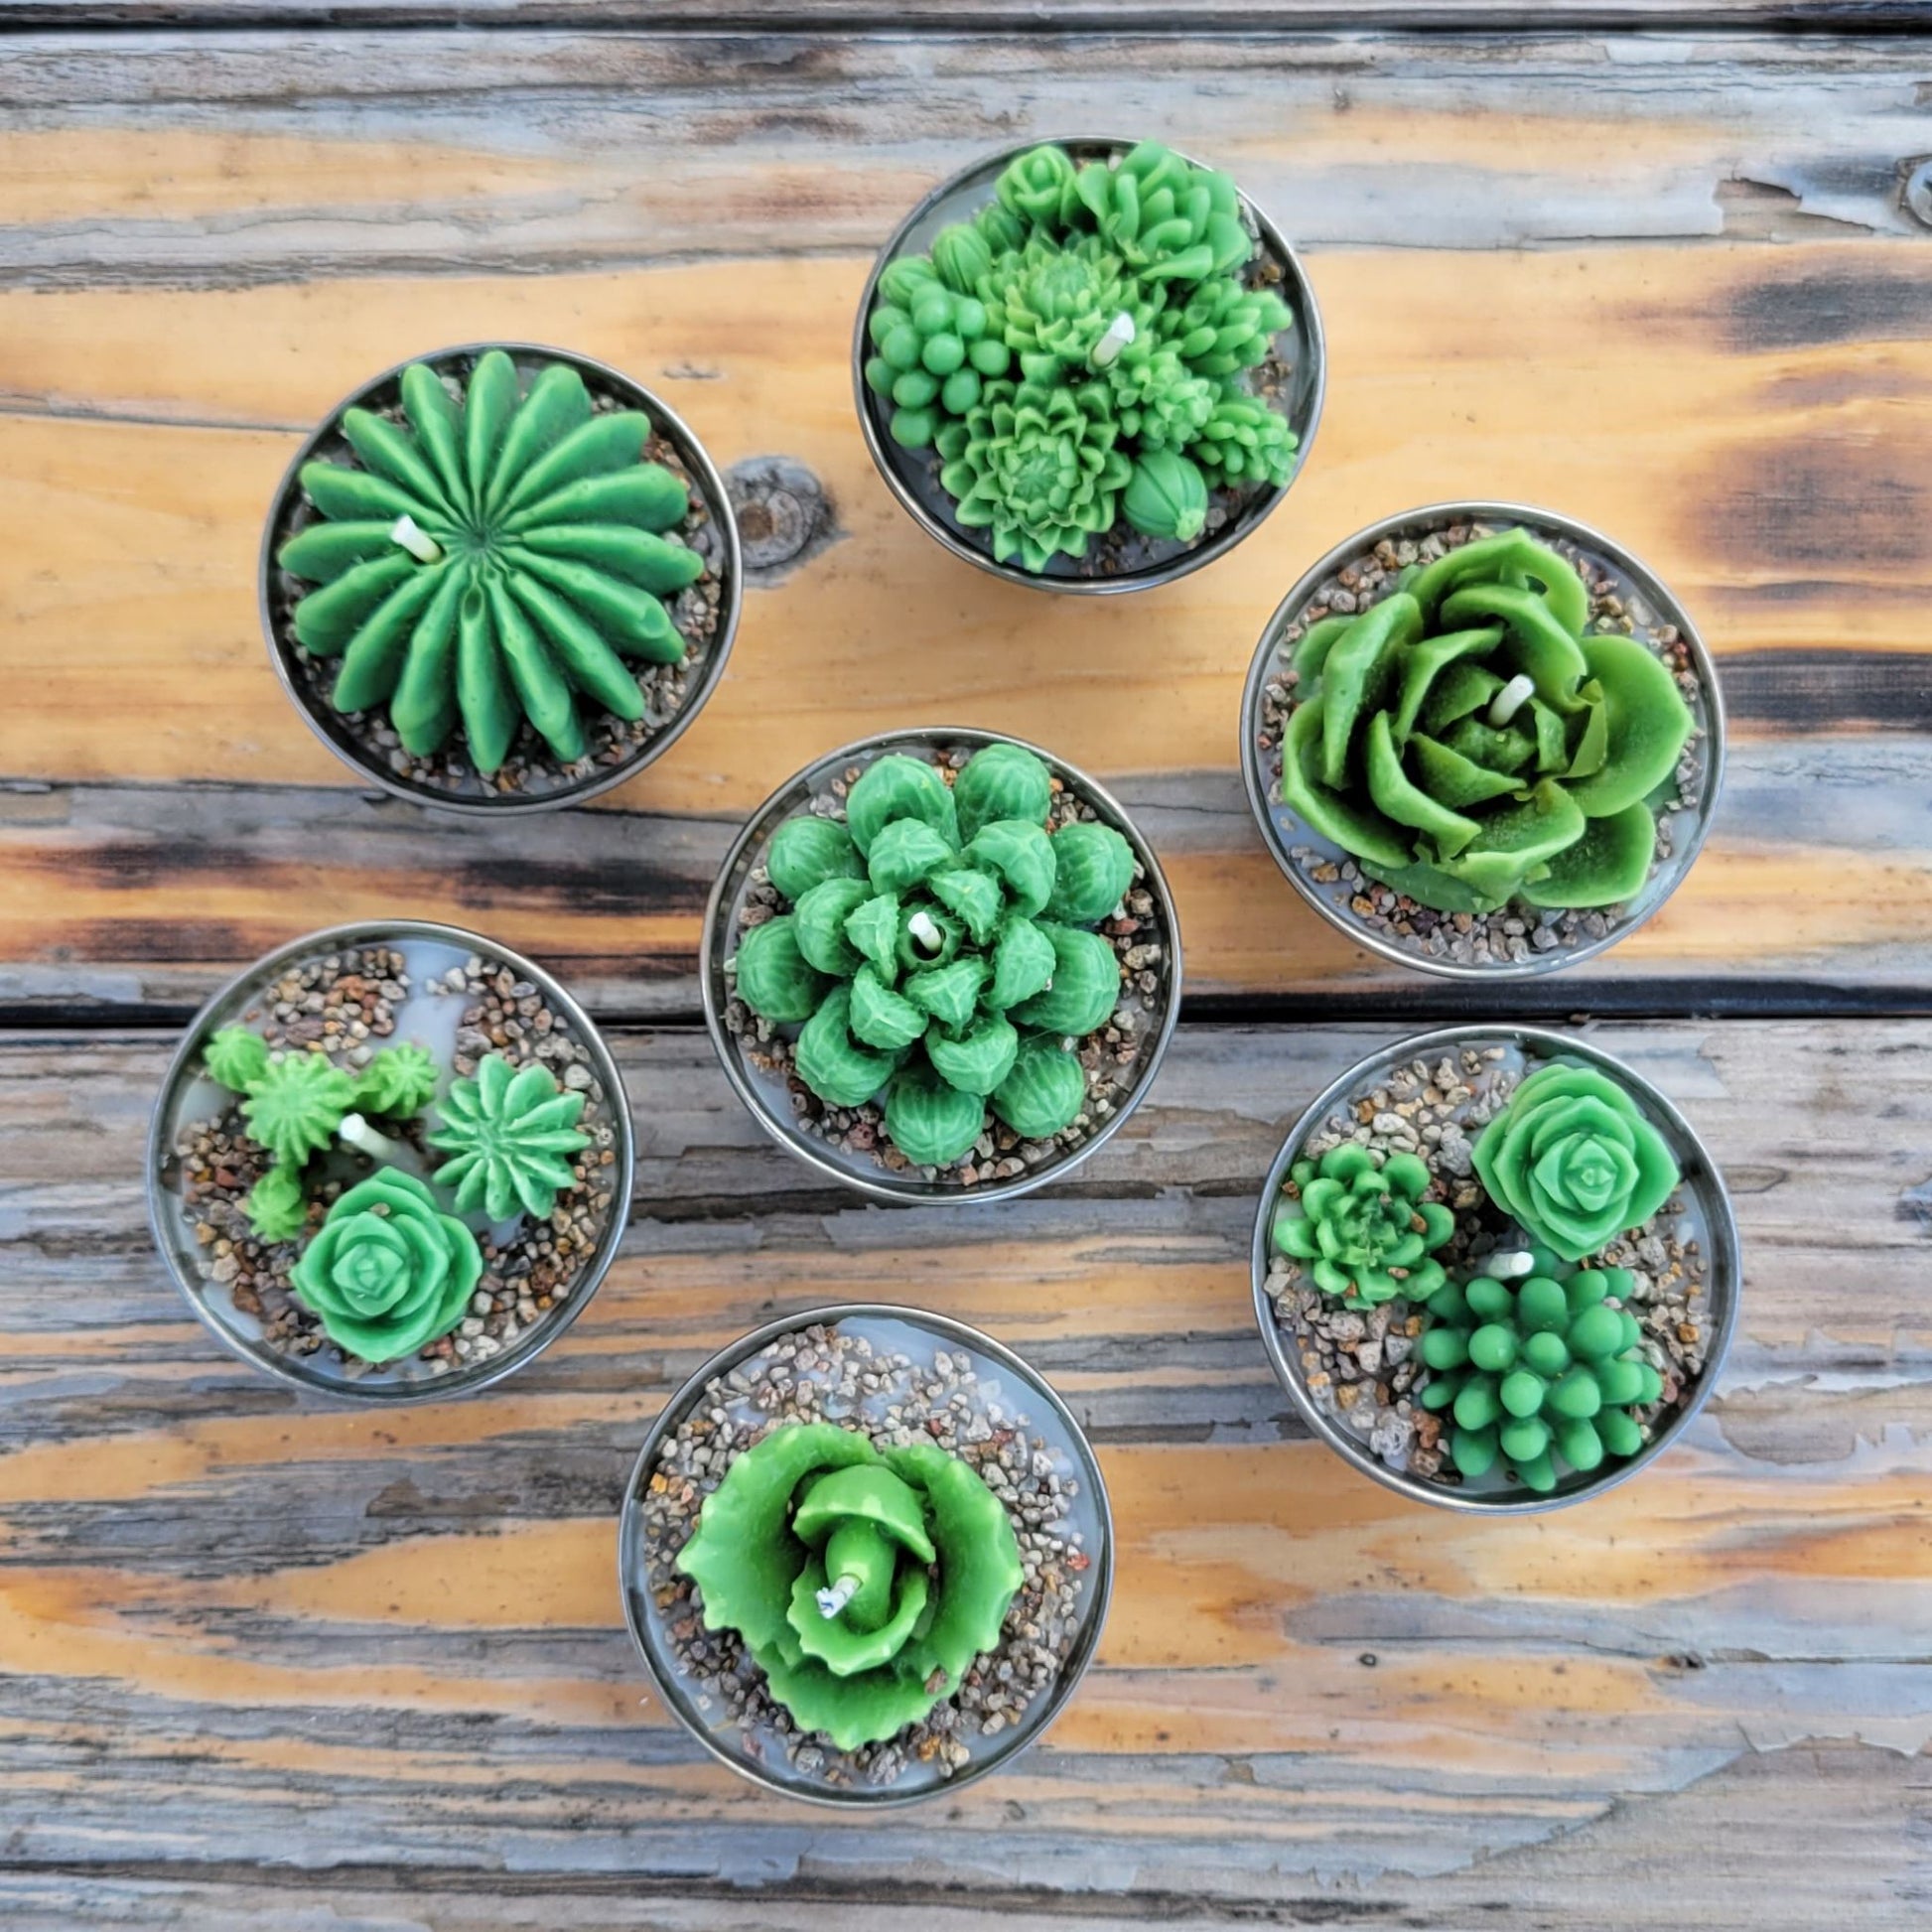 Seven handmade succulent candles in a stainless steel cup.